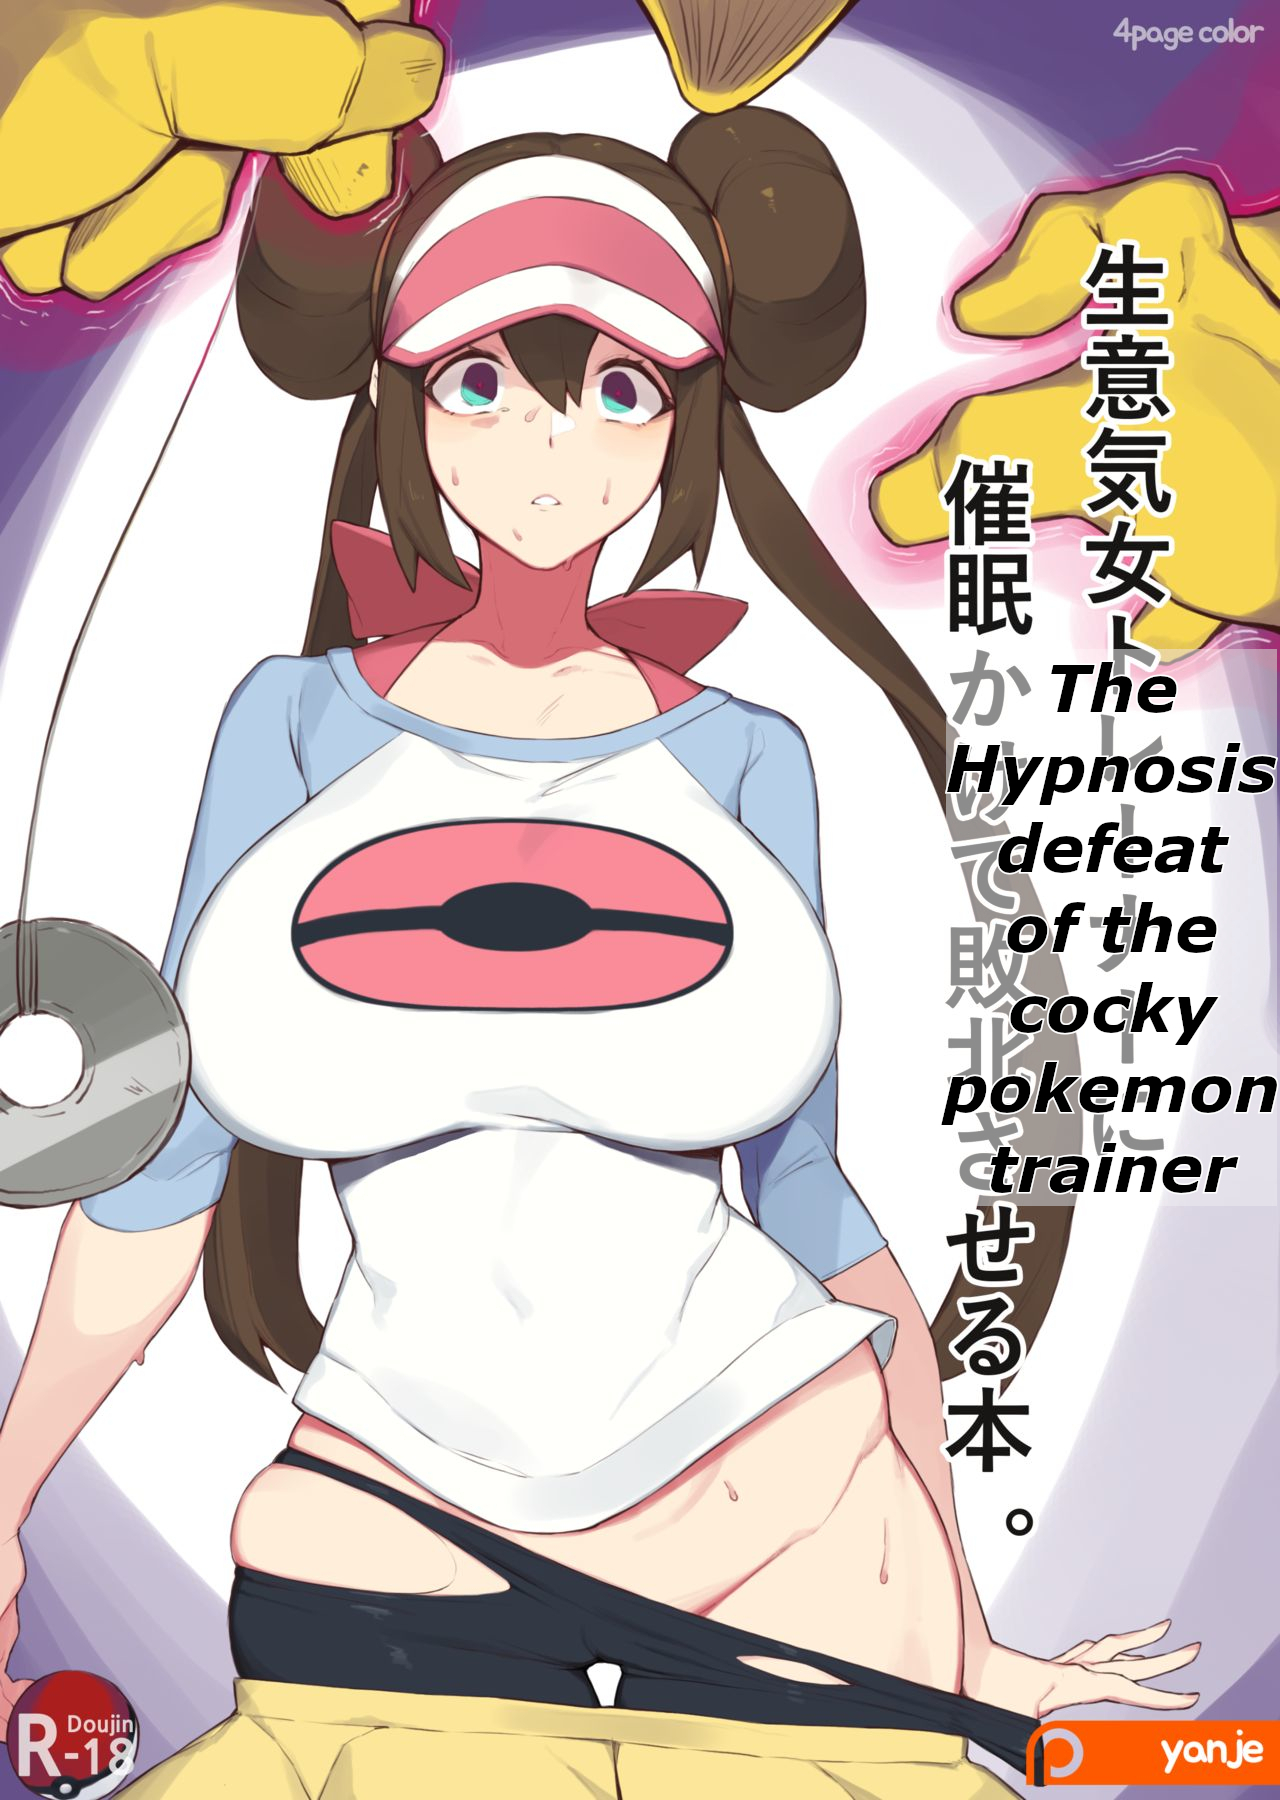 Pokemon Hypnosis Porn - hypno - sorted by number of objects - Free Hentai